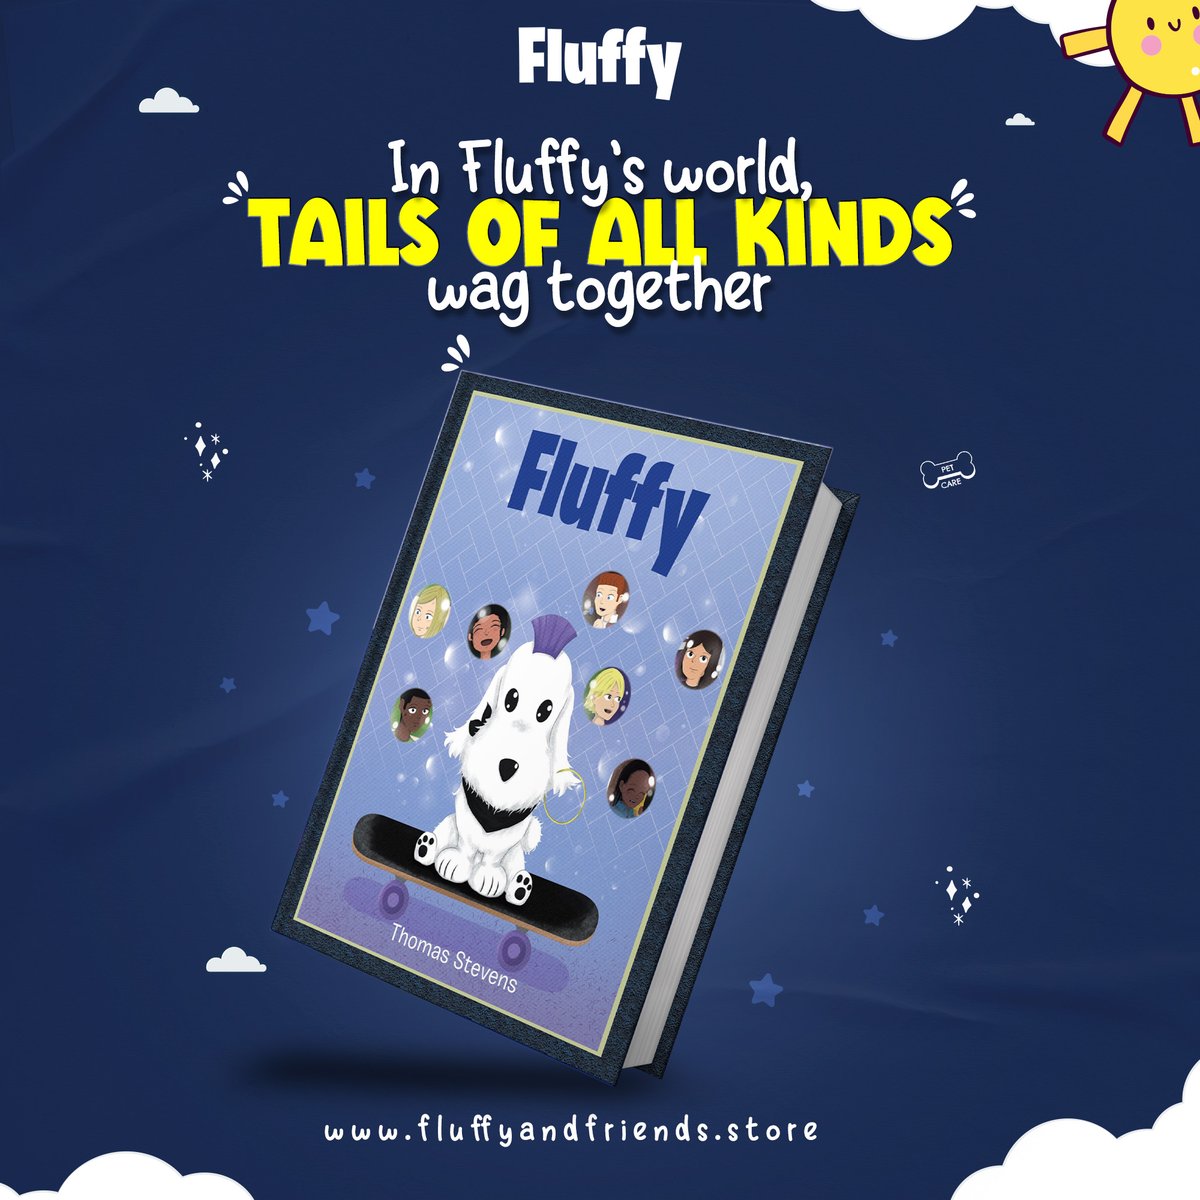 Woof-tastic adventure alert! Fluffy's world is a paradise where furry buddies of all kinds come together! Join the fur-mily fun today! amzn.com/1662454406/ #Fluffy #ThomasStevens #FluffyAndFriends #inclusivity #diversity #bookish #booknerd #booktwt #writerslift